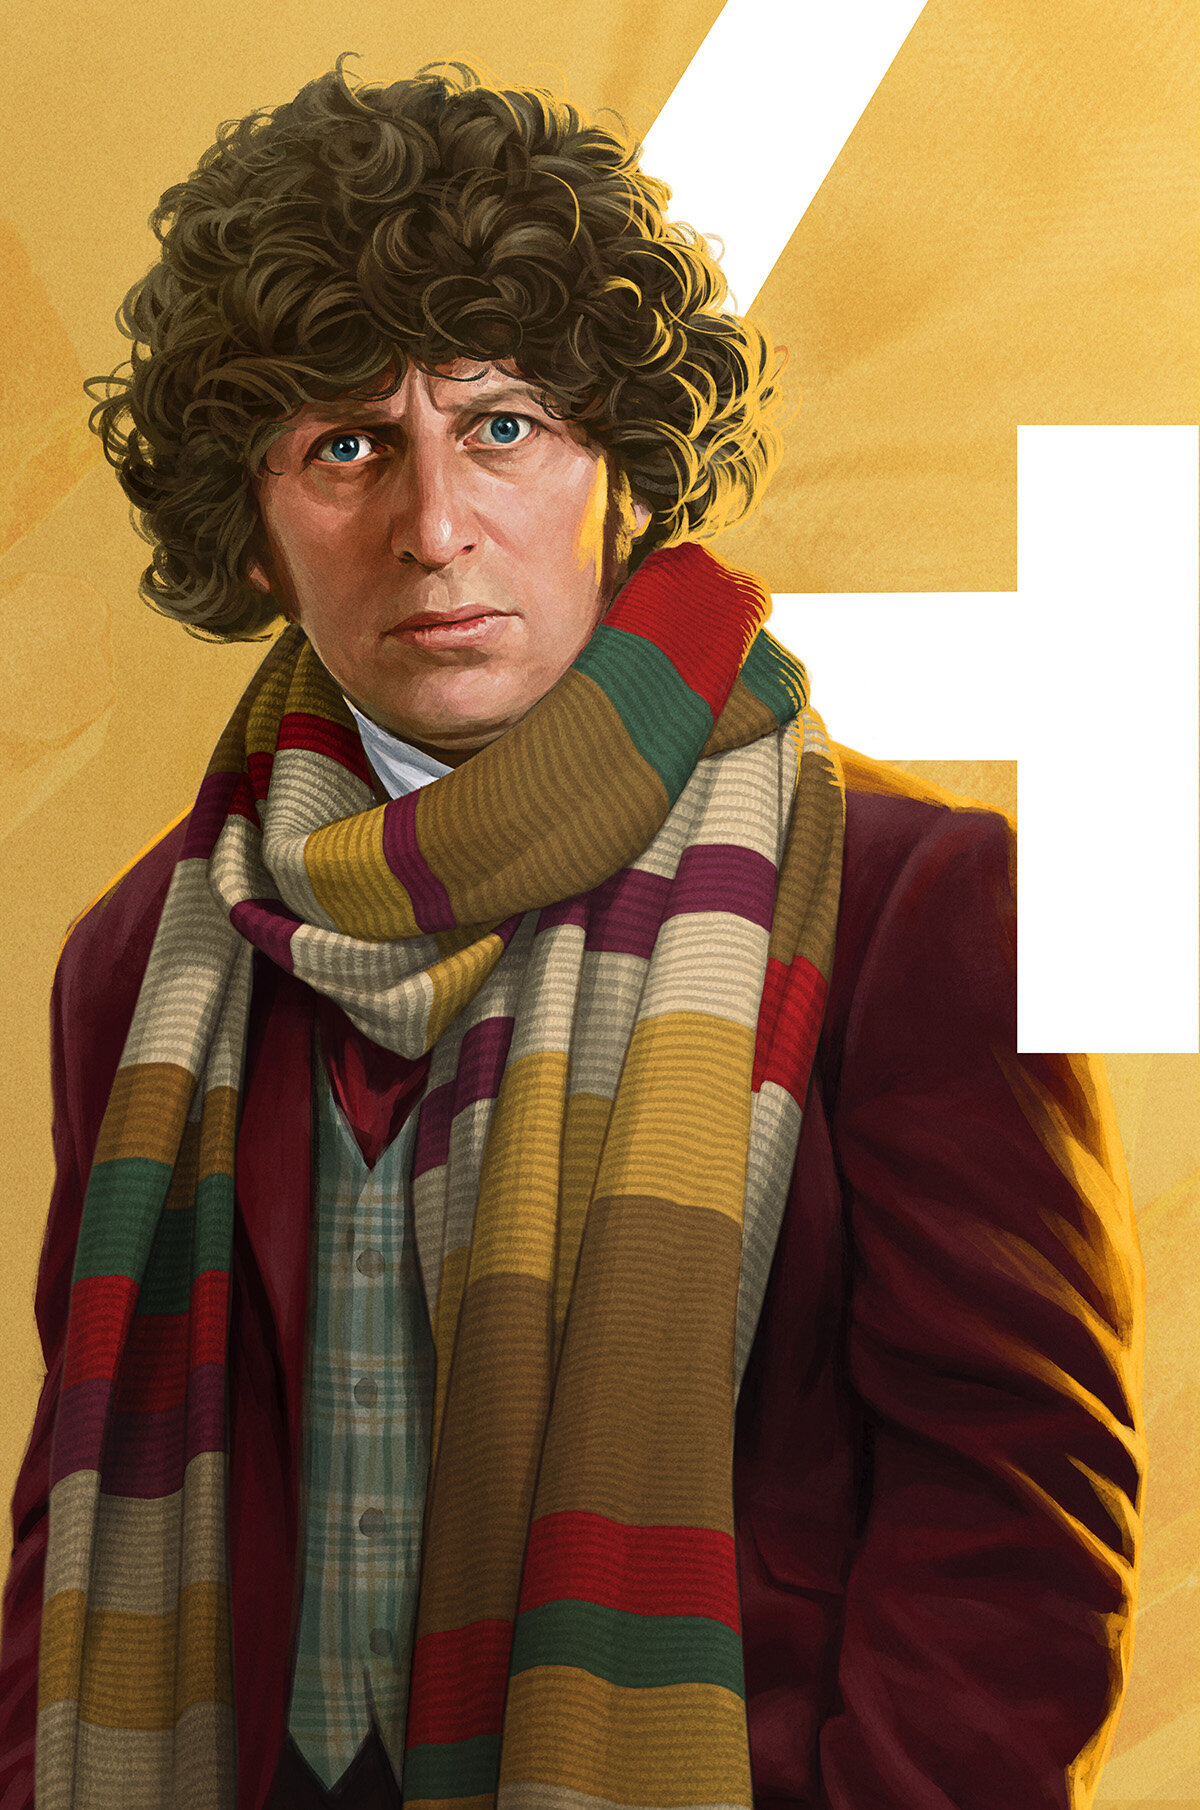 Dr_Who_TomBaker_RGB_FY_Test_02_1200px.jpg